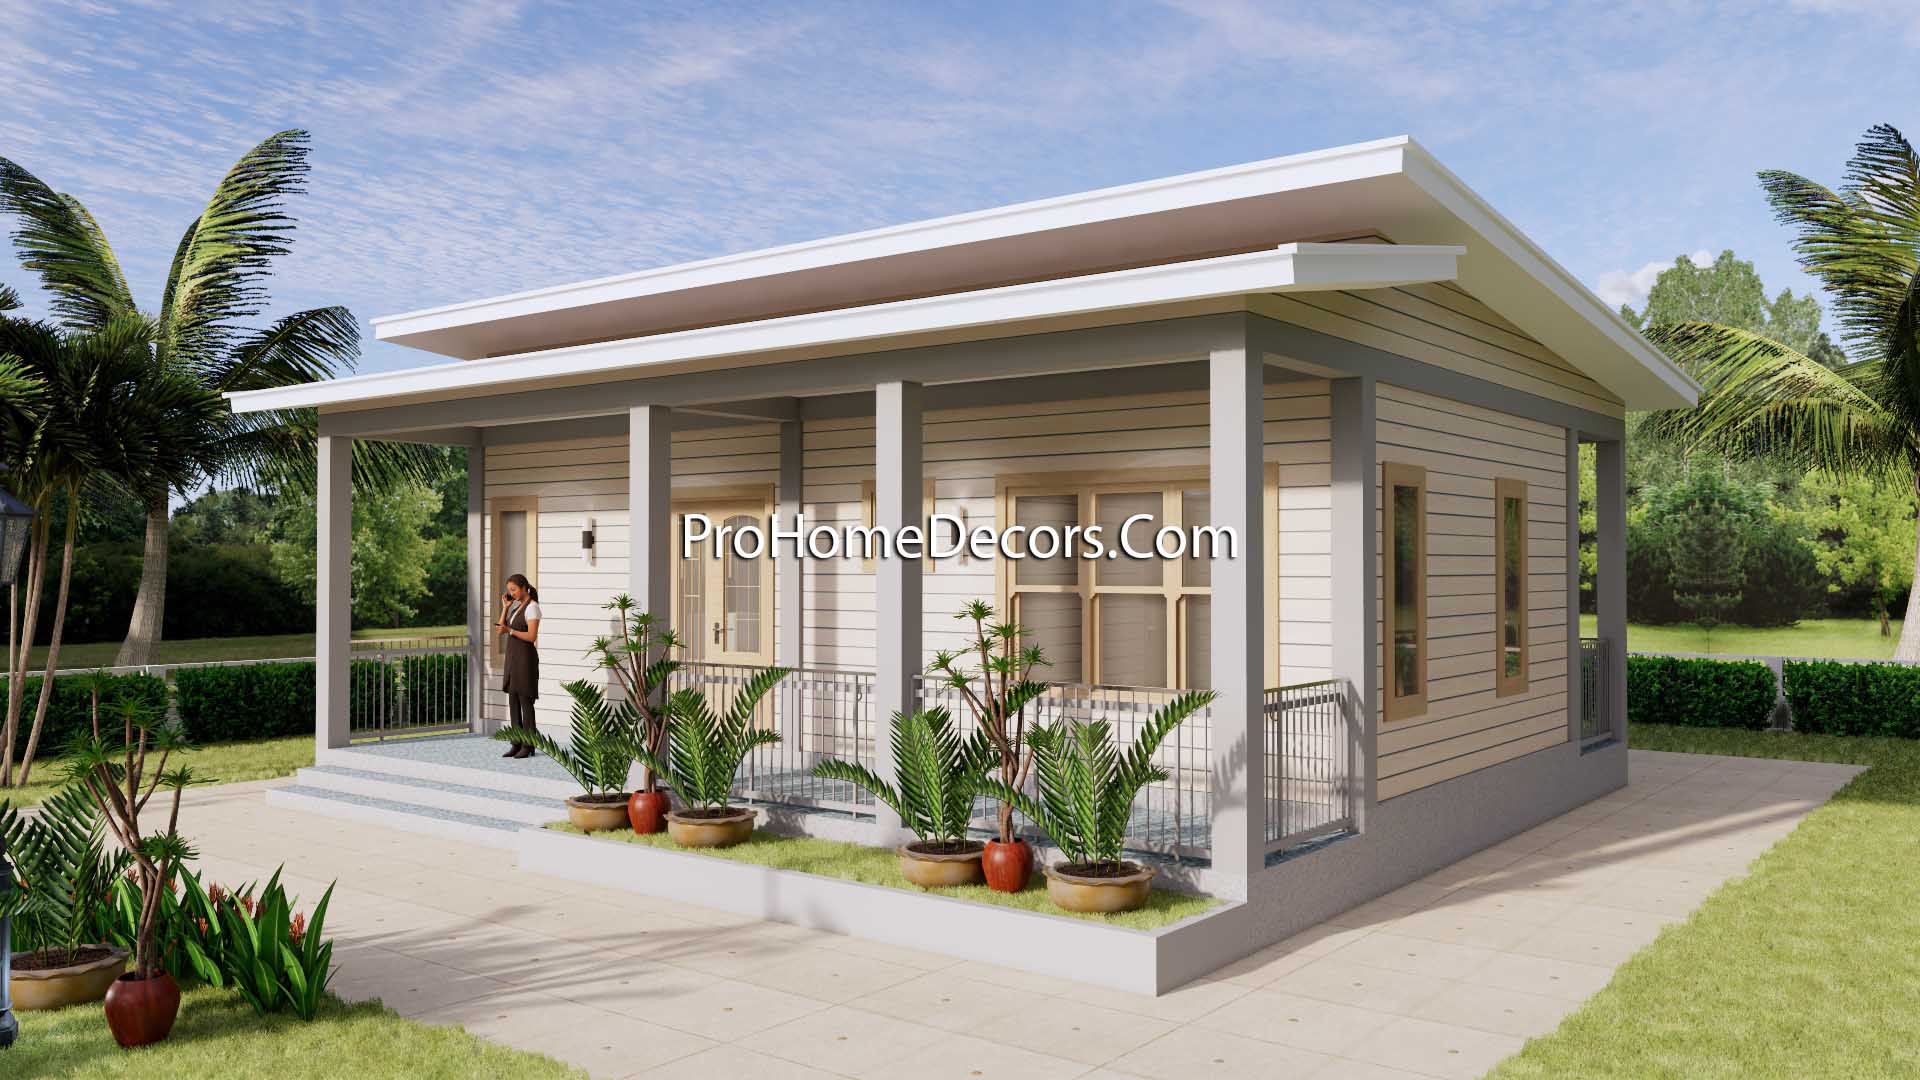 House Design Plans 32x16 Shed Roof 1 Bed PDF Plan 1